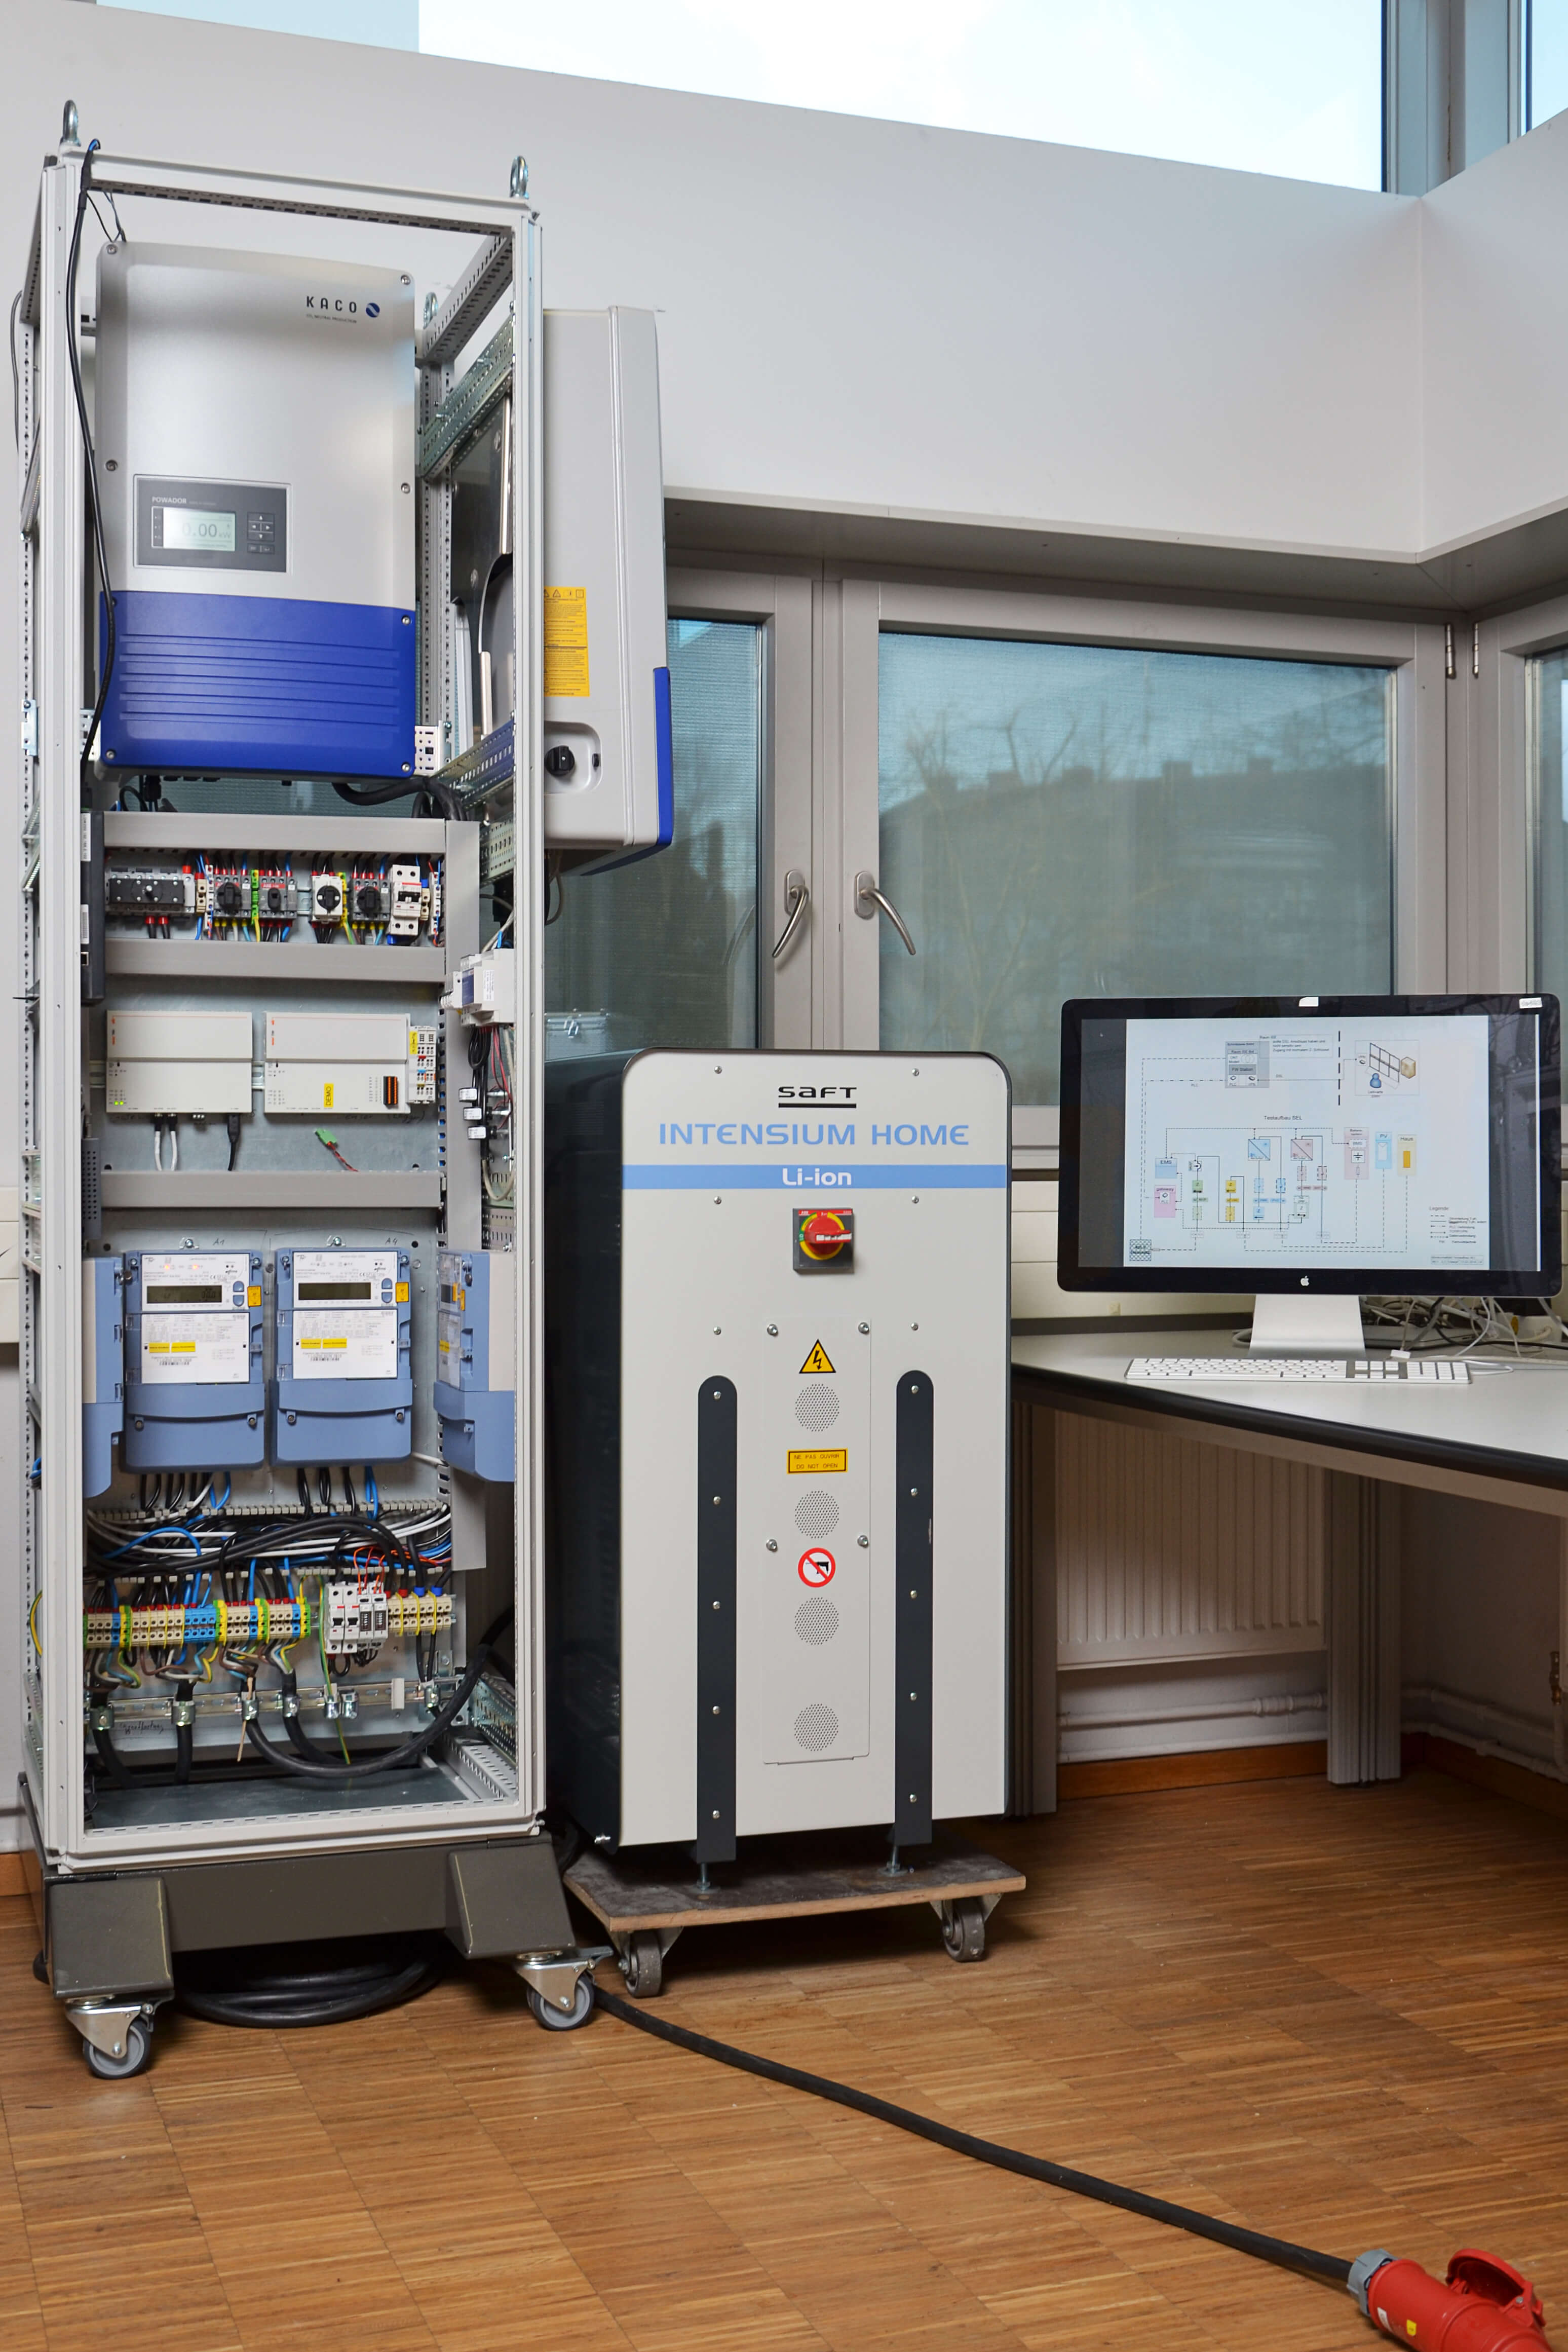 Net-PV test setup of the PV battery system in the Smart Energy service lab of Fraunhofer ISE. 